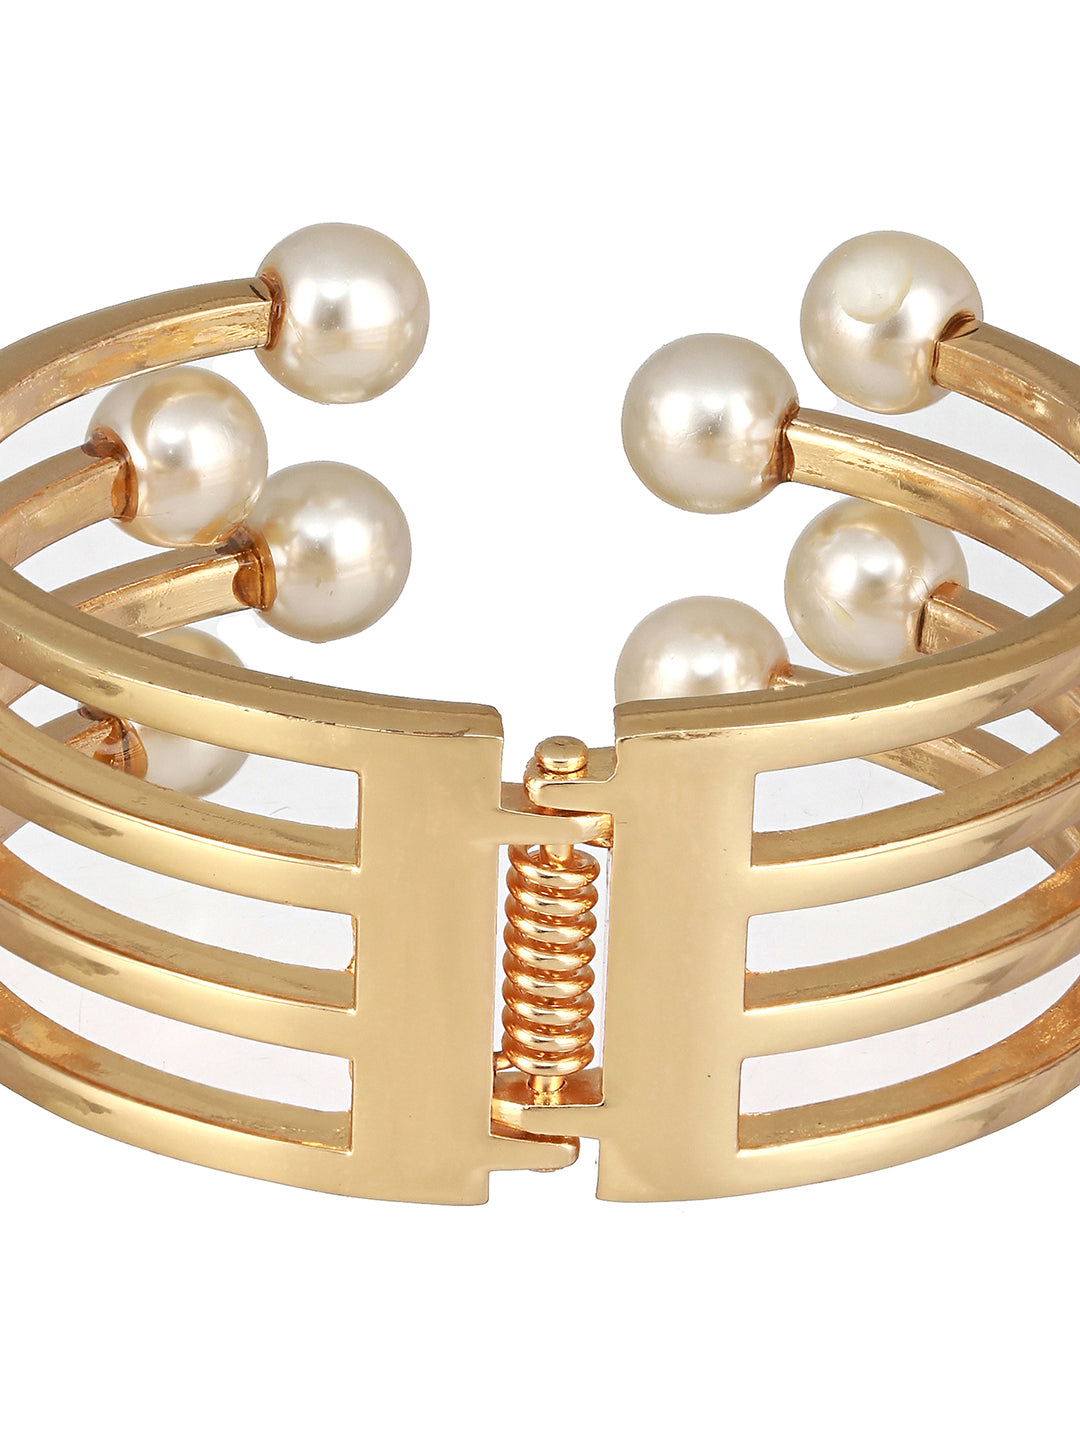 JAZZ AND SIZZLE Gold-Plated Pearls Studded Cuff Bracelet - Jazzandsizzle